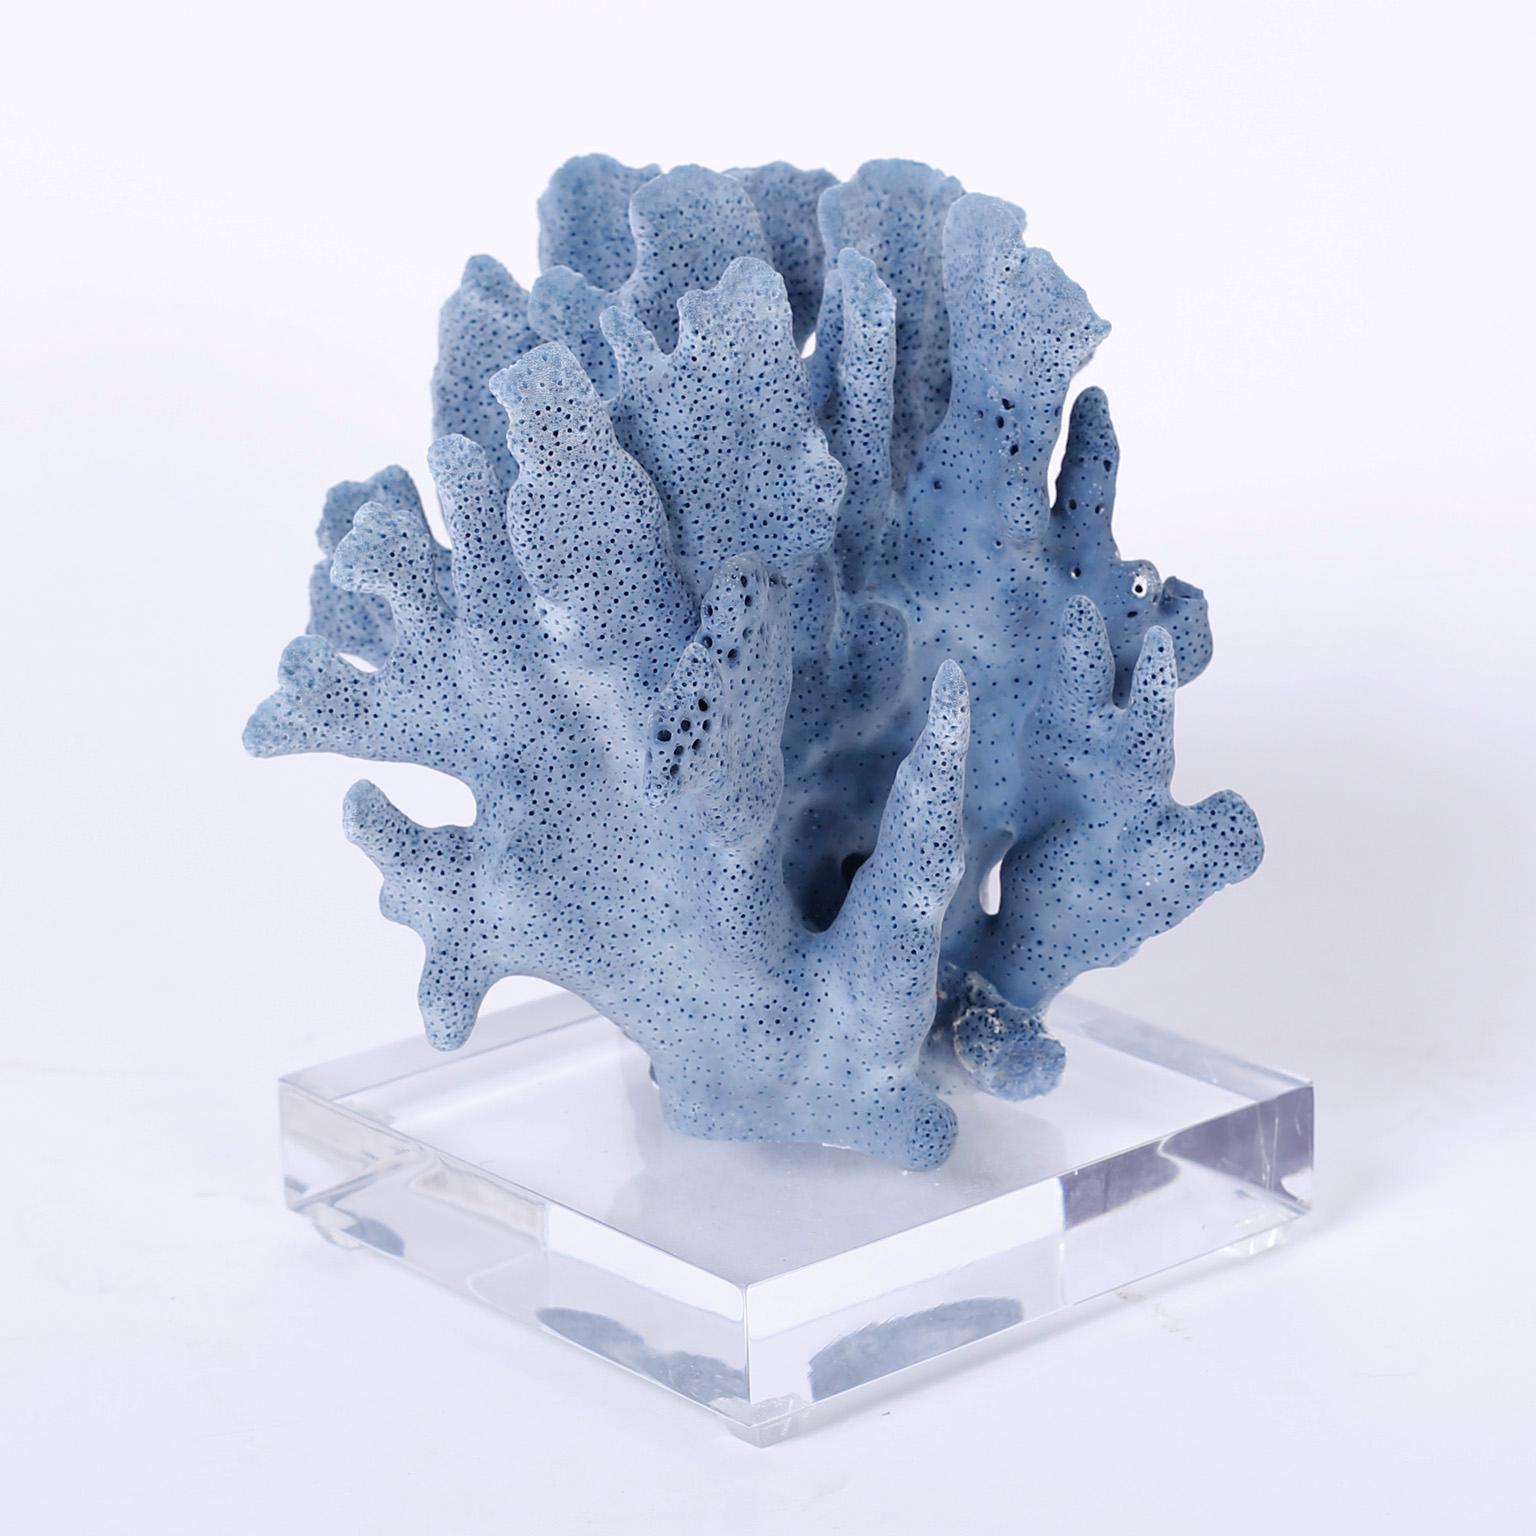 Here is a blue coral specimen with its own organic sea inspired form, texture, and alluring blue color. Presented on a Lucite stand to enhance the sculptural elements.



